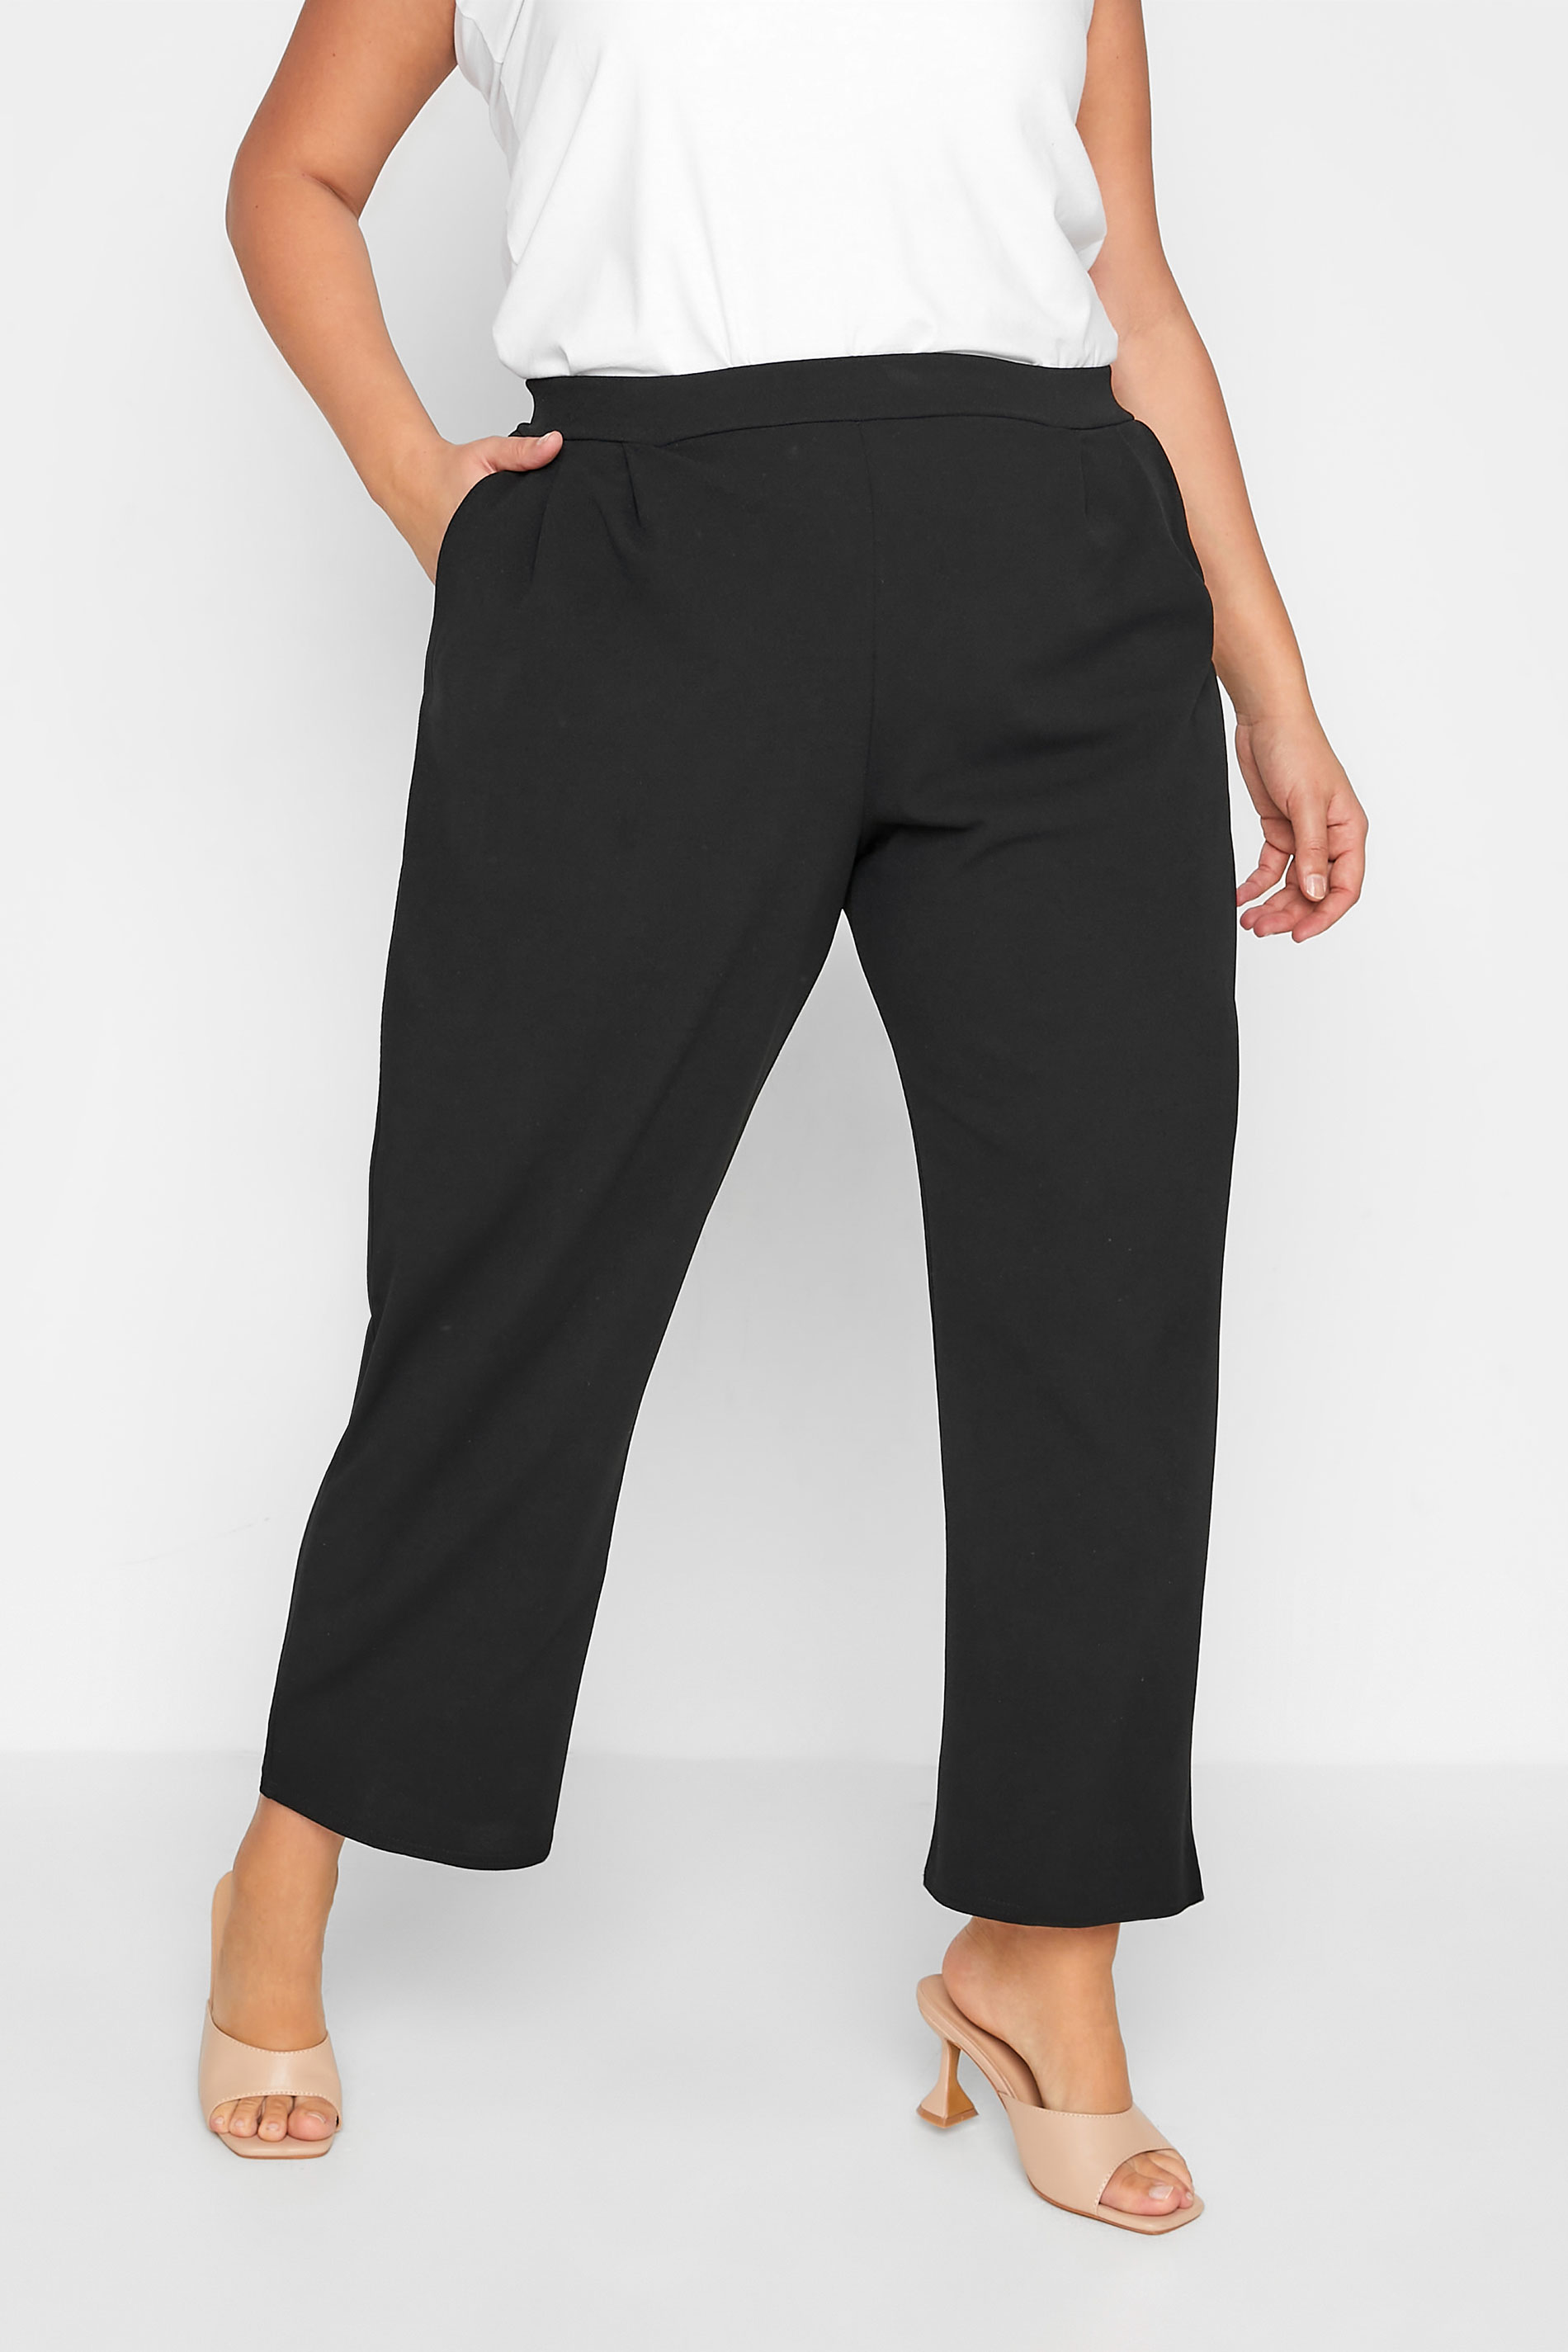 LIMITED COLLECTION Curve Black Wide Leg Trousers_B.jpg